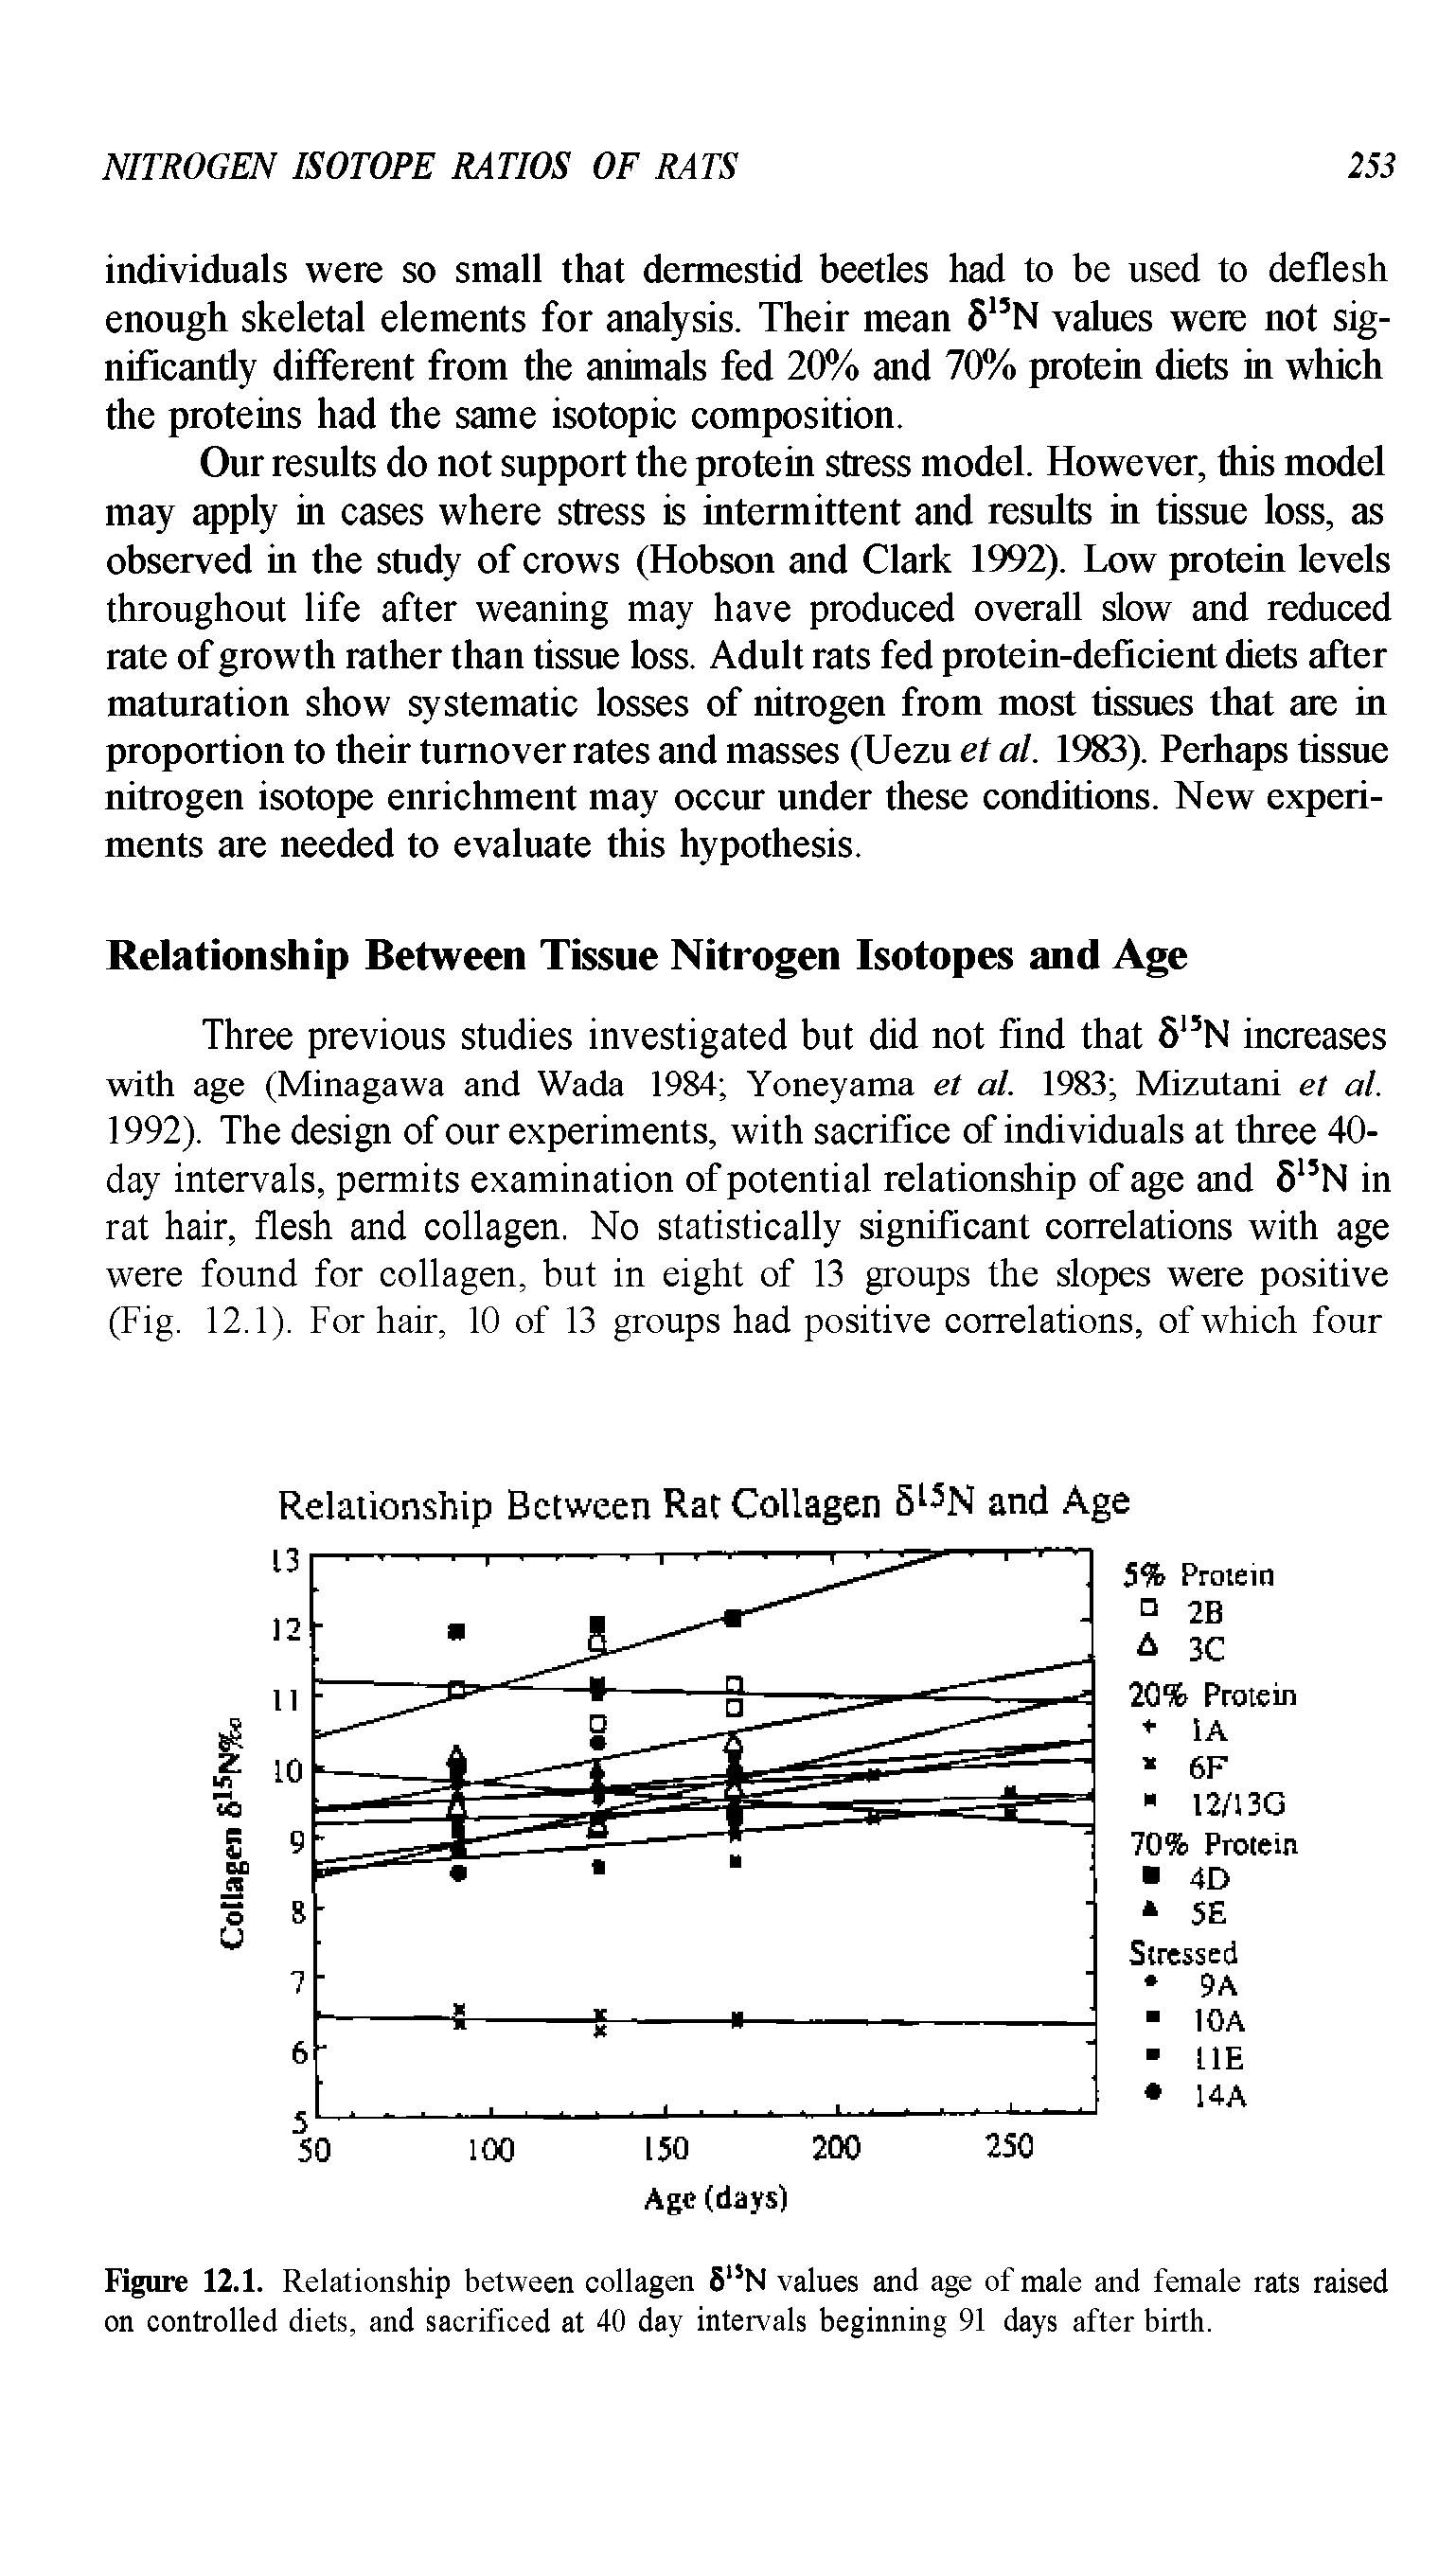 Figure 12.1. Relationship between collagen 8 N values and age of male and female rats raised on controlled diets, and sacrificed at 40 day intervals beginning 91 days after birth.